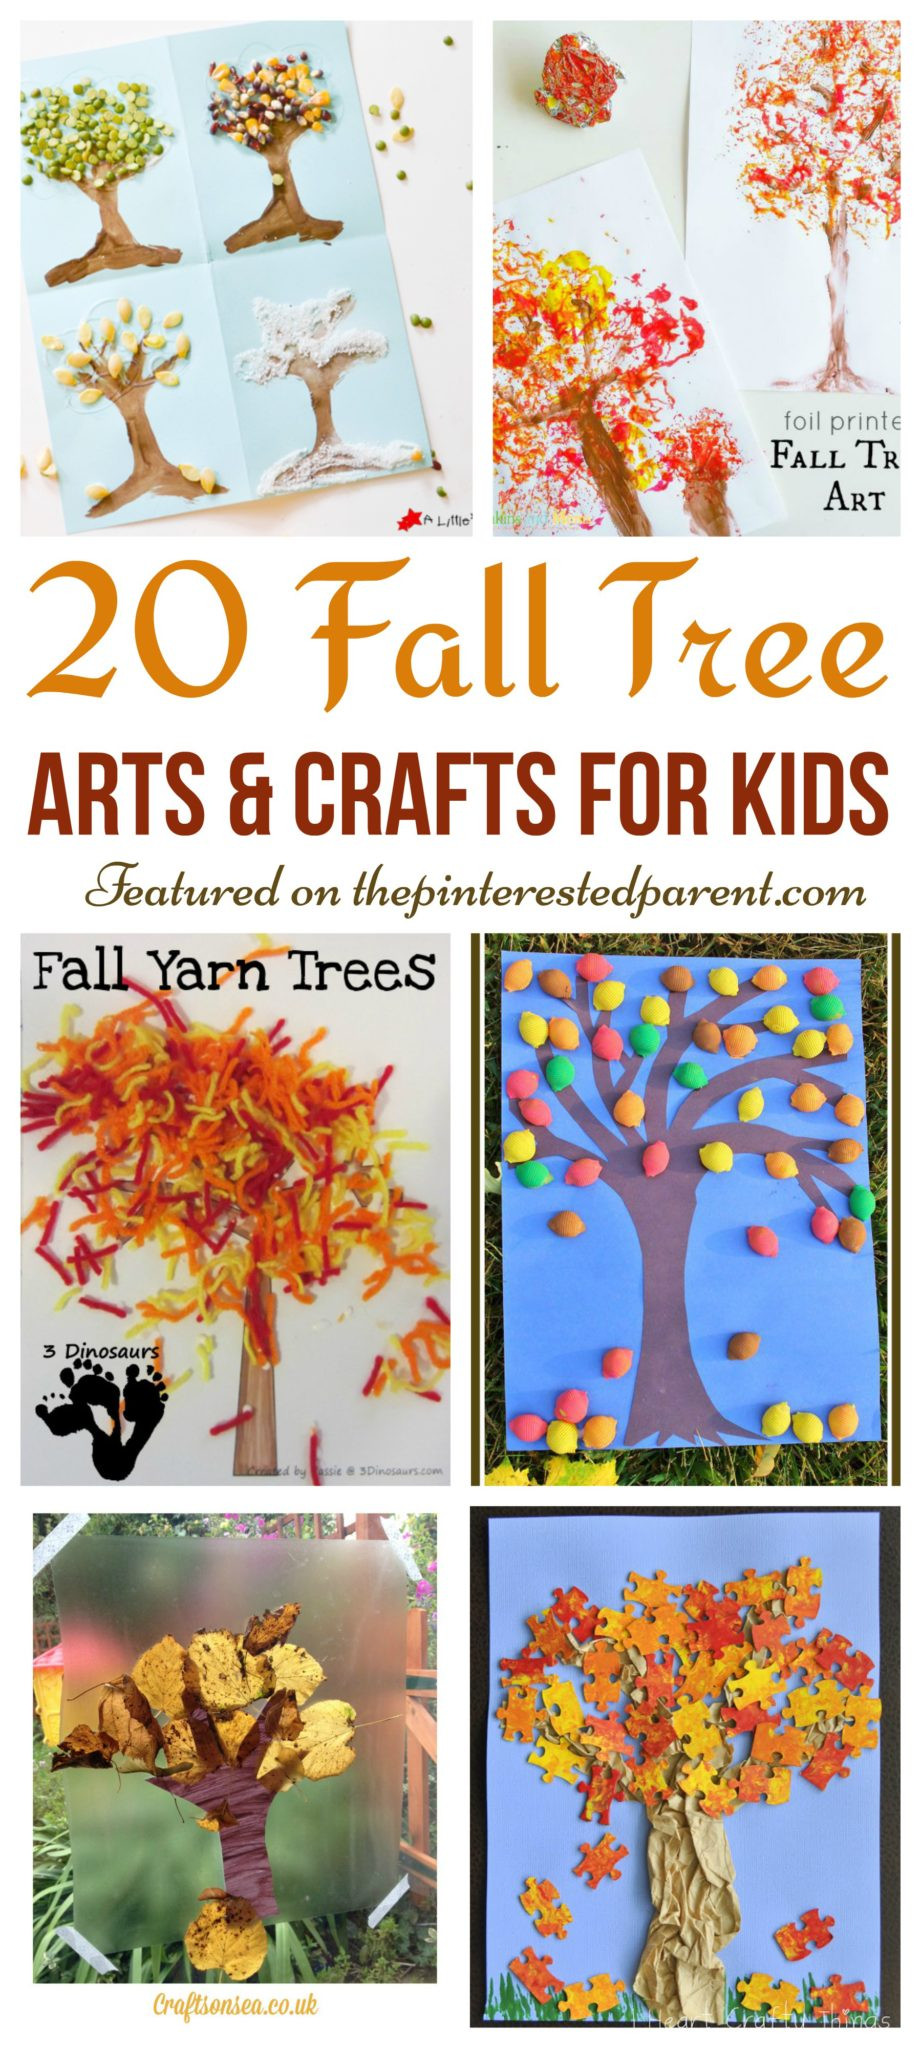 Preschoolers Craft Activities
 20 Fall Tree Arts & Crafts Ideas For Kids – The